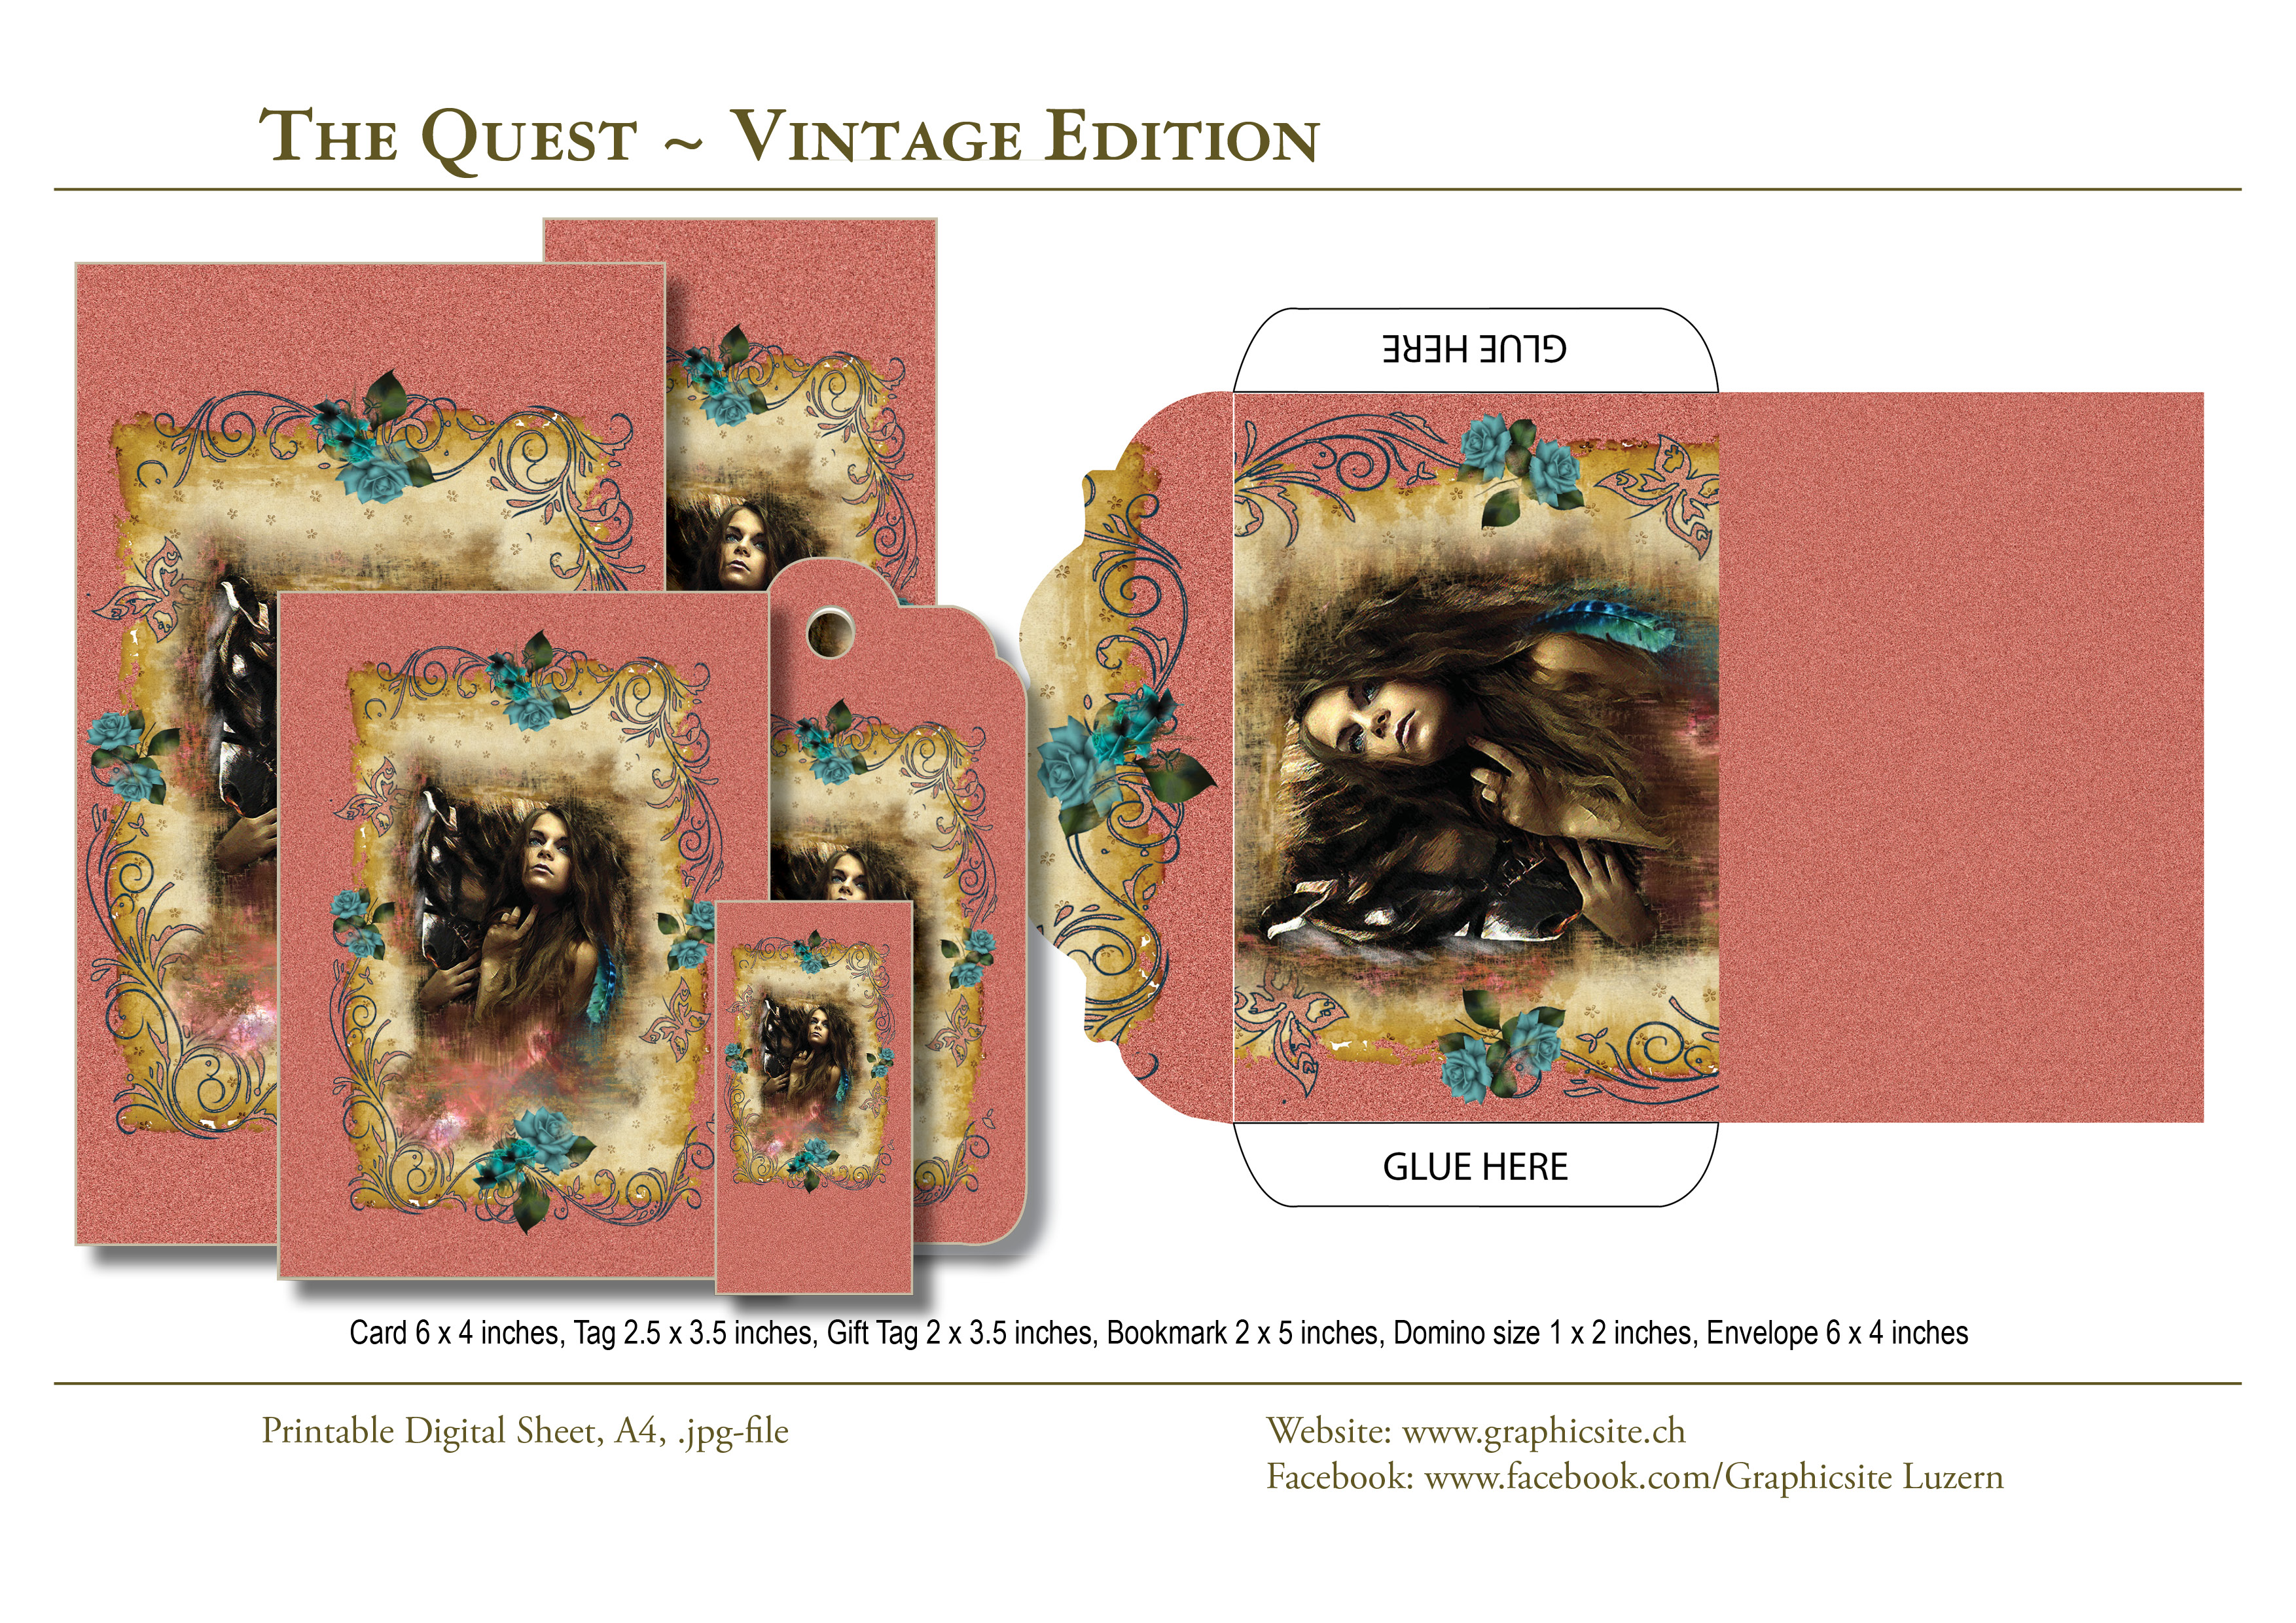 Printable Digital Collages - Collections - TheQuest_VintageEdition